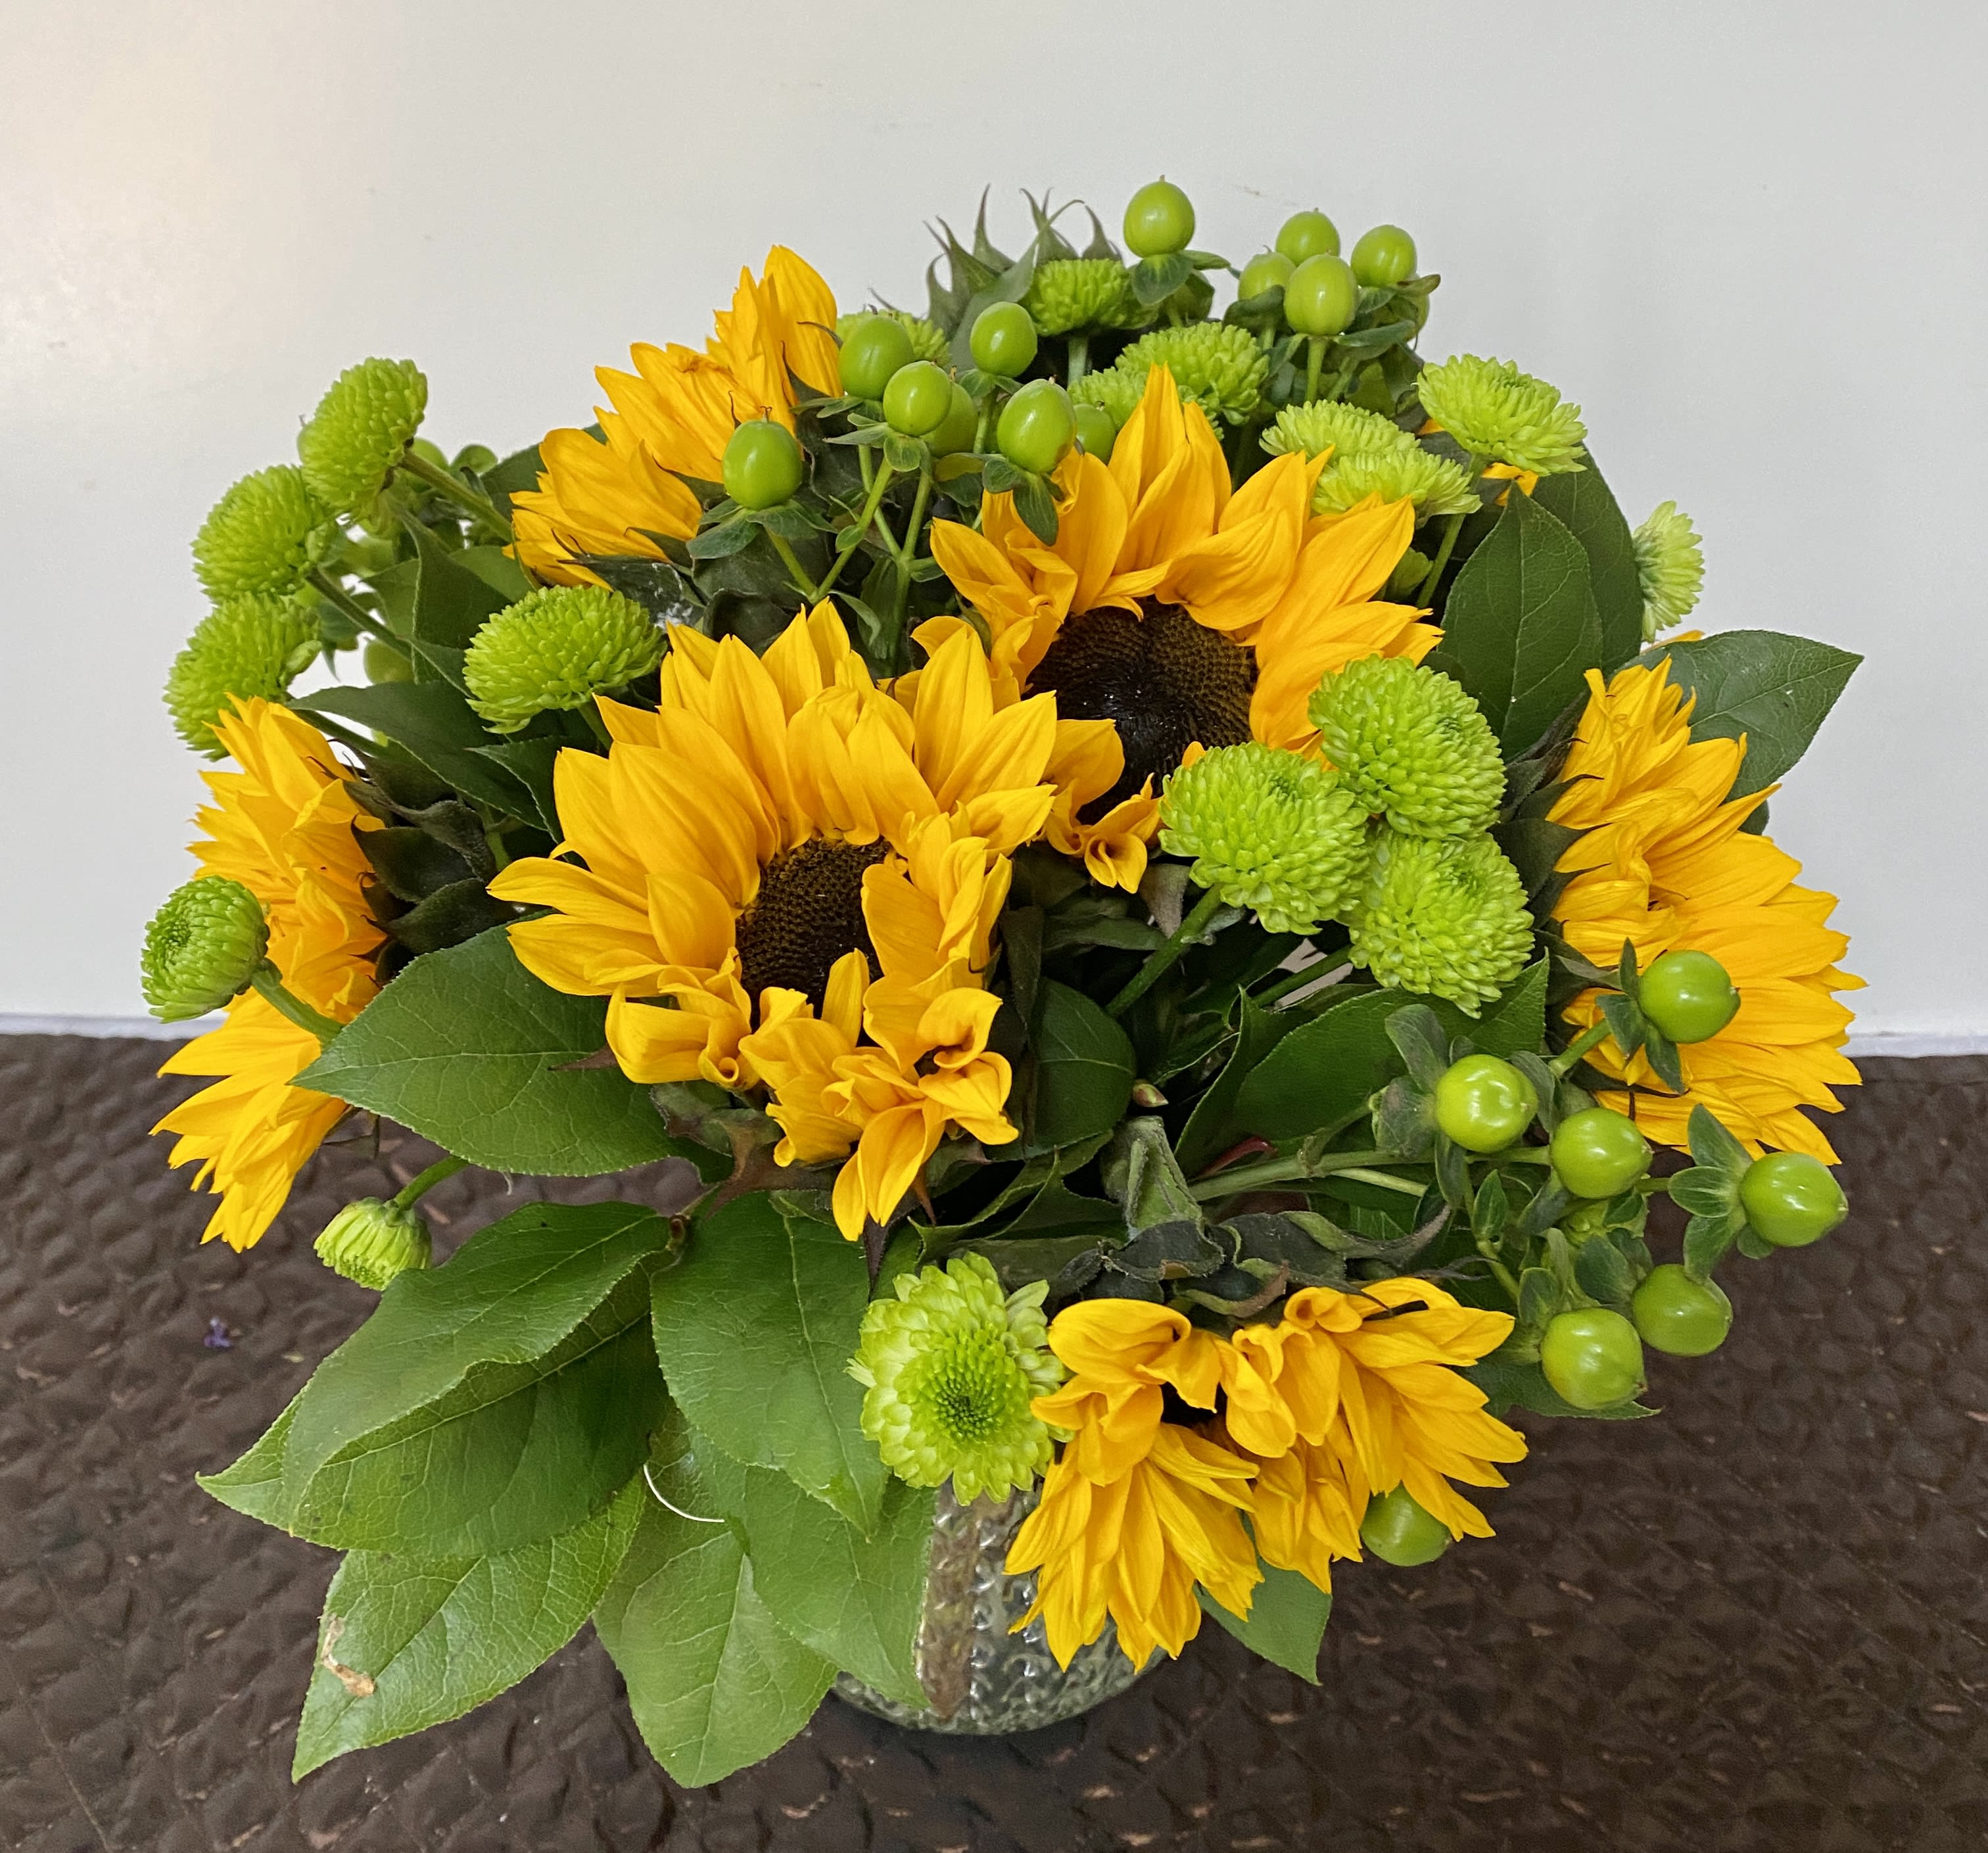 The Princess Bride  - Bunch of Sunflowers in clear glass vase